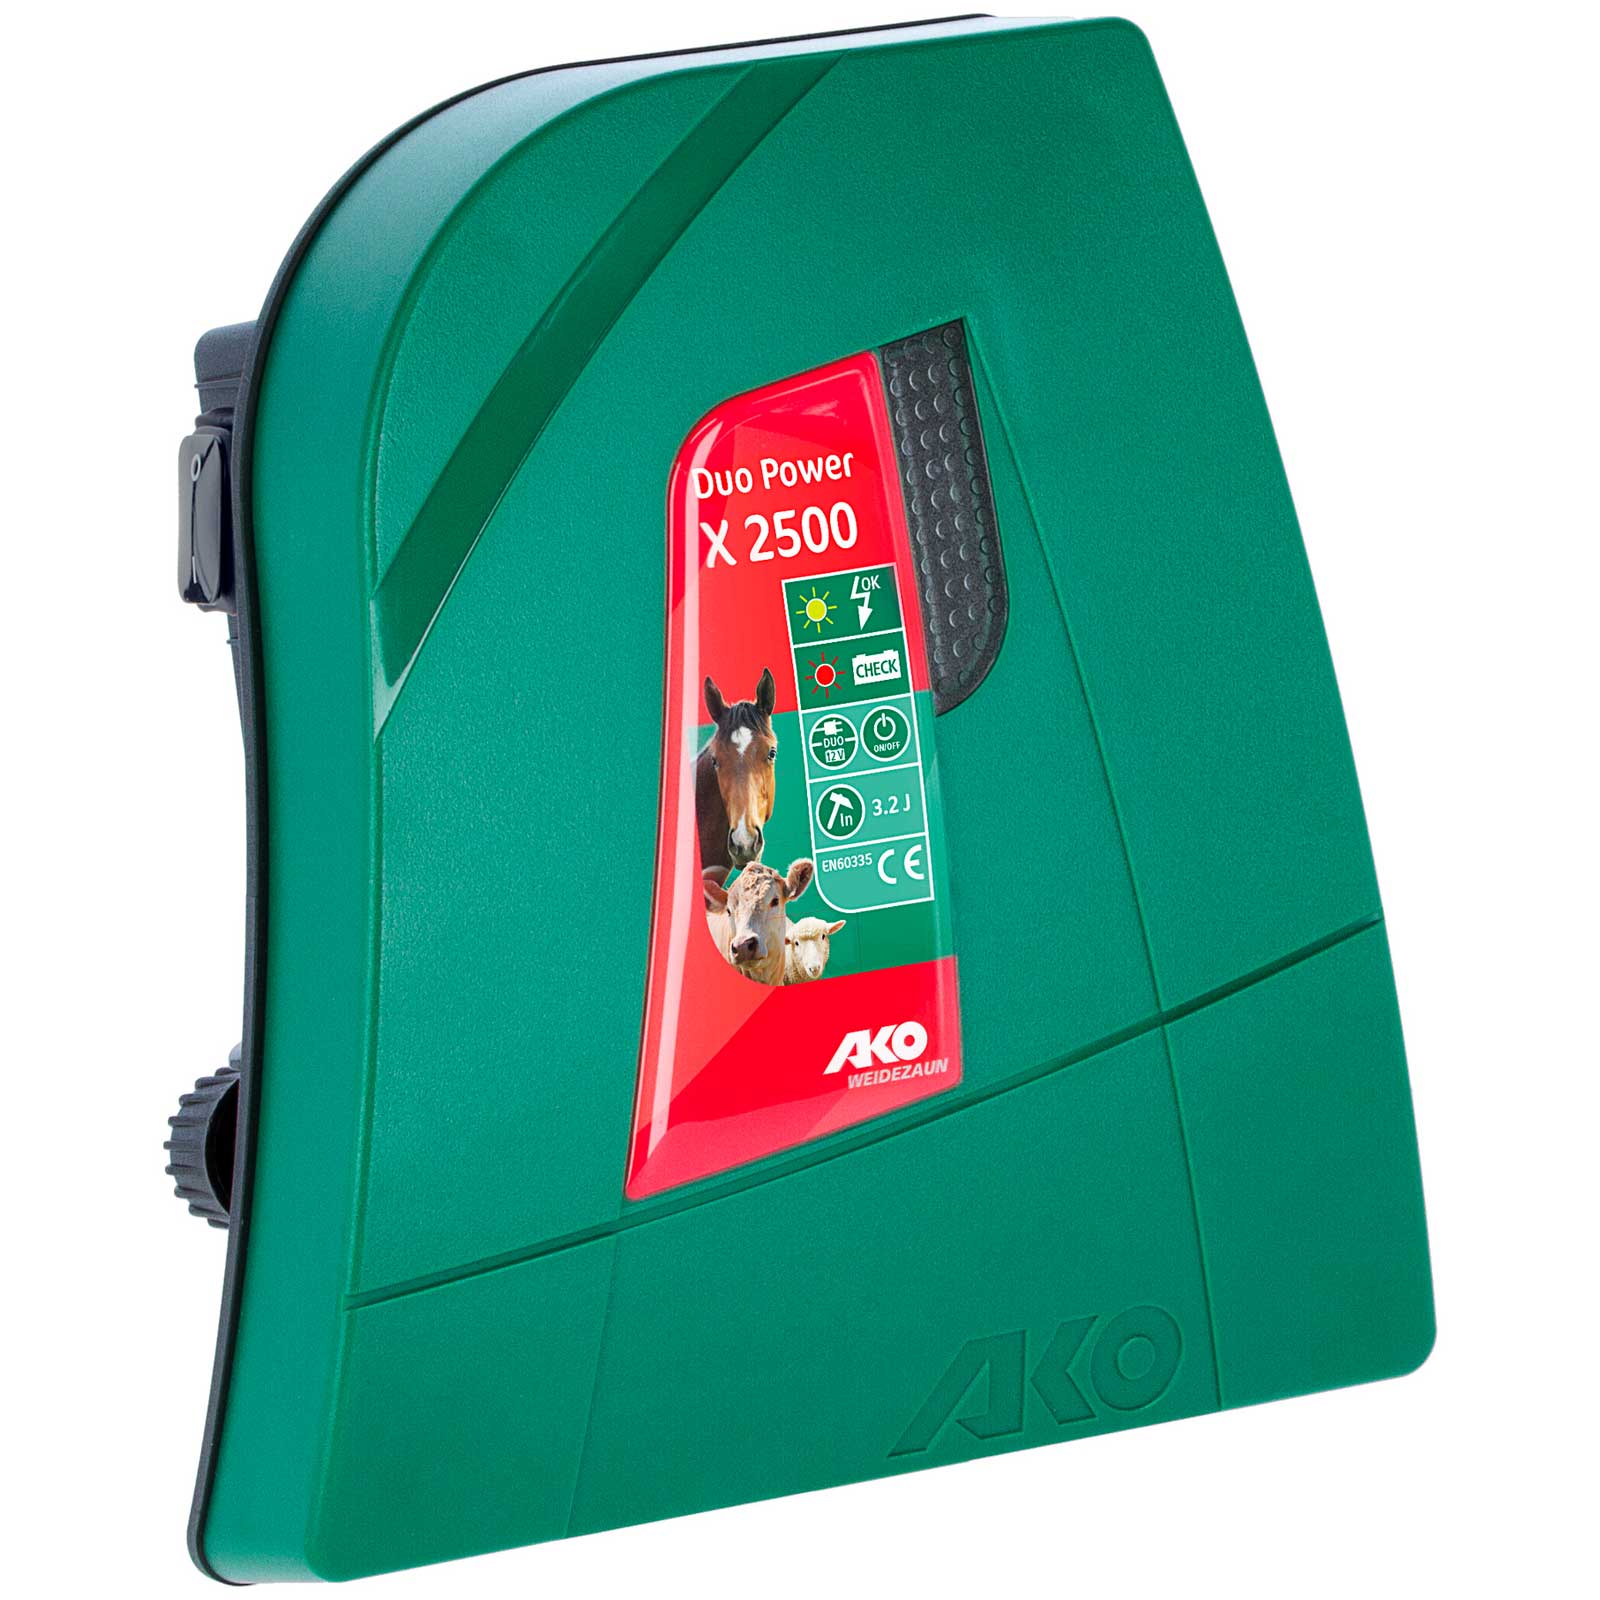 AKO Duo Power X 2500 electric fence energiser 12V / 230V, 3,2 joules